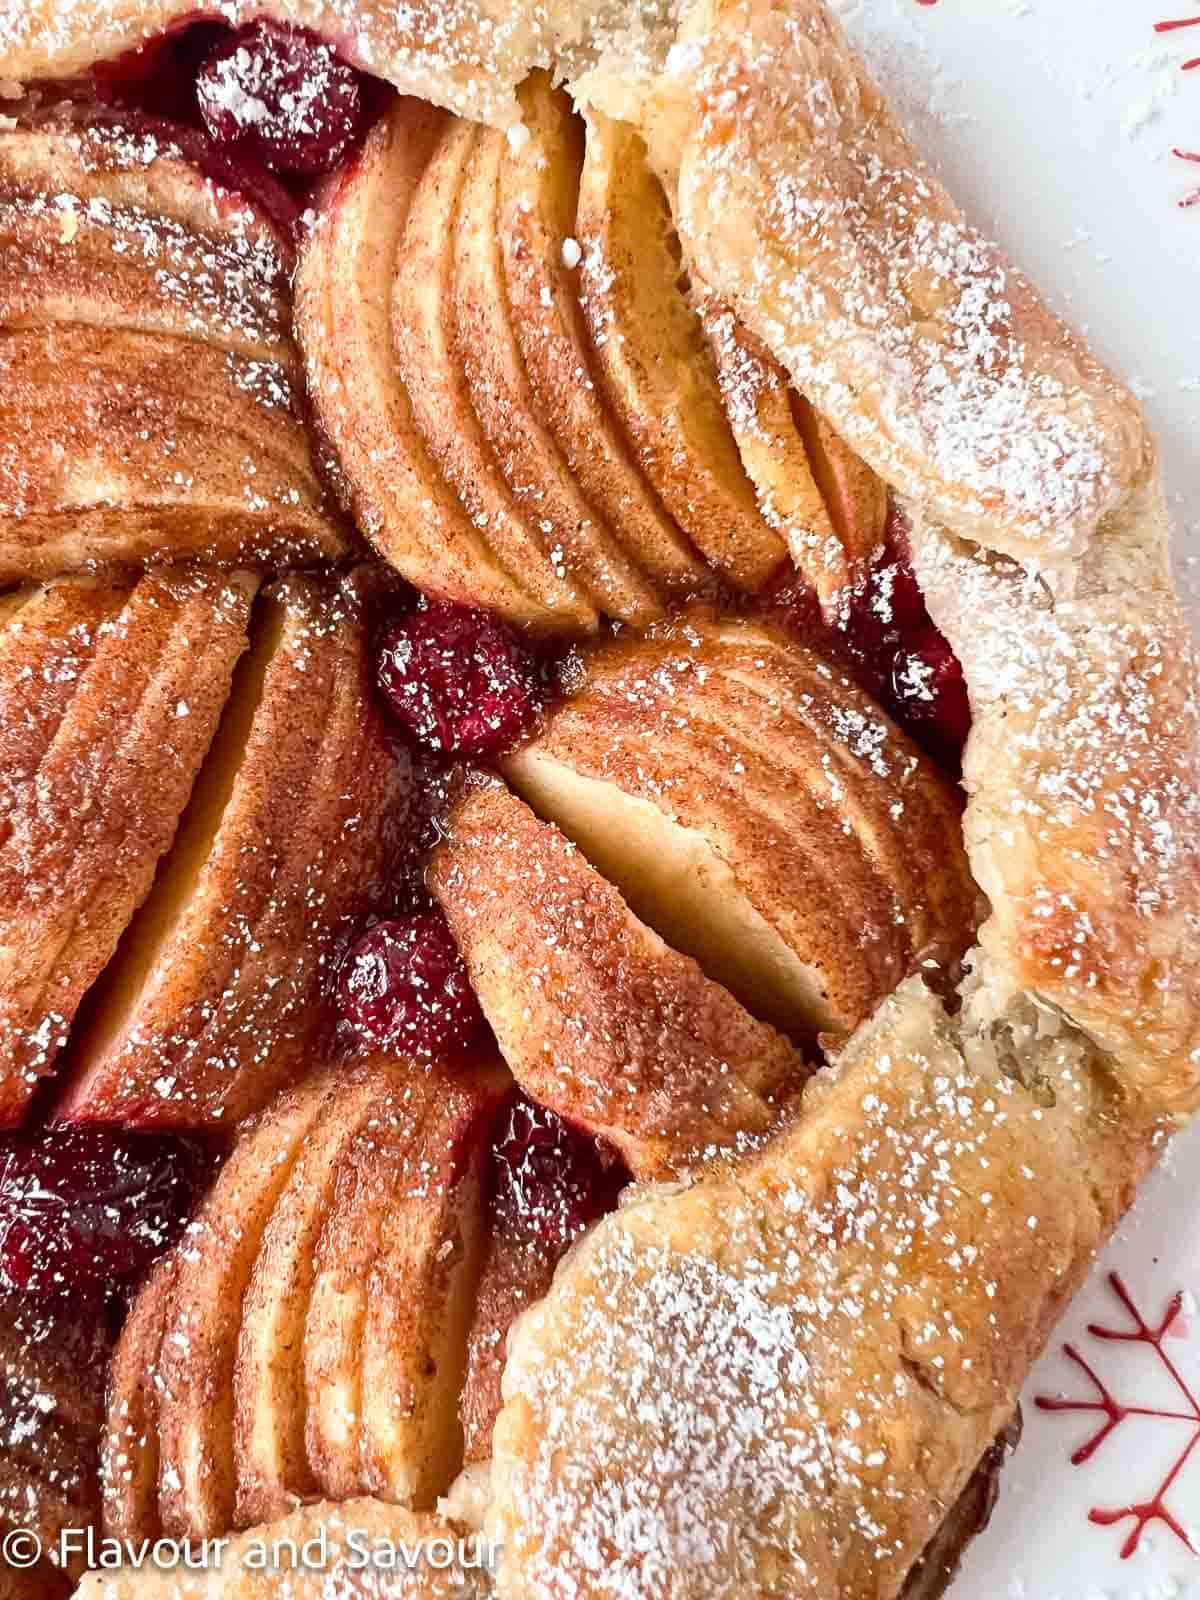 Puff pastry apple galette with cranberries, showing groups of thinly sliced apples.